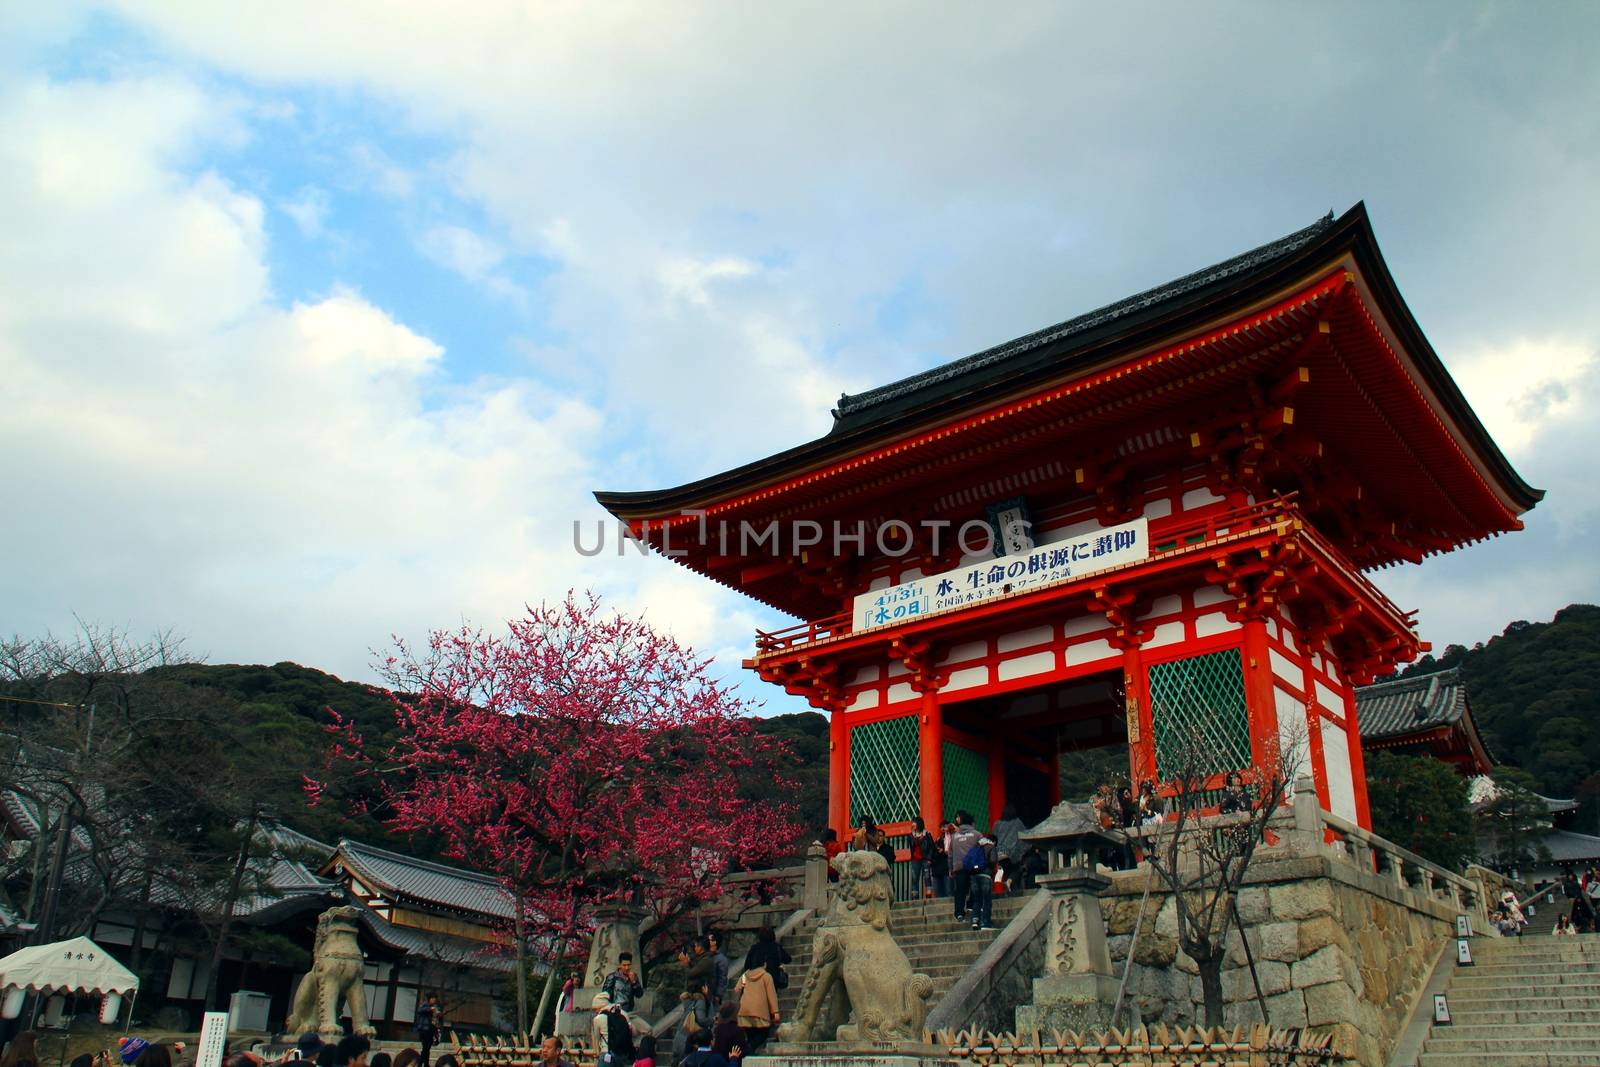 Photo shows details of old Japanese temple.